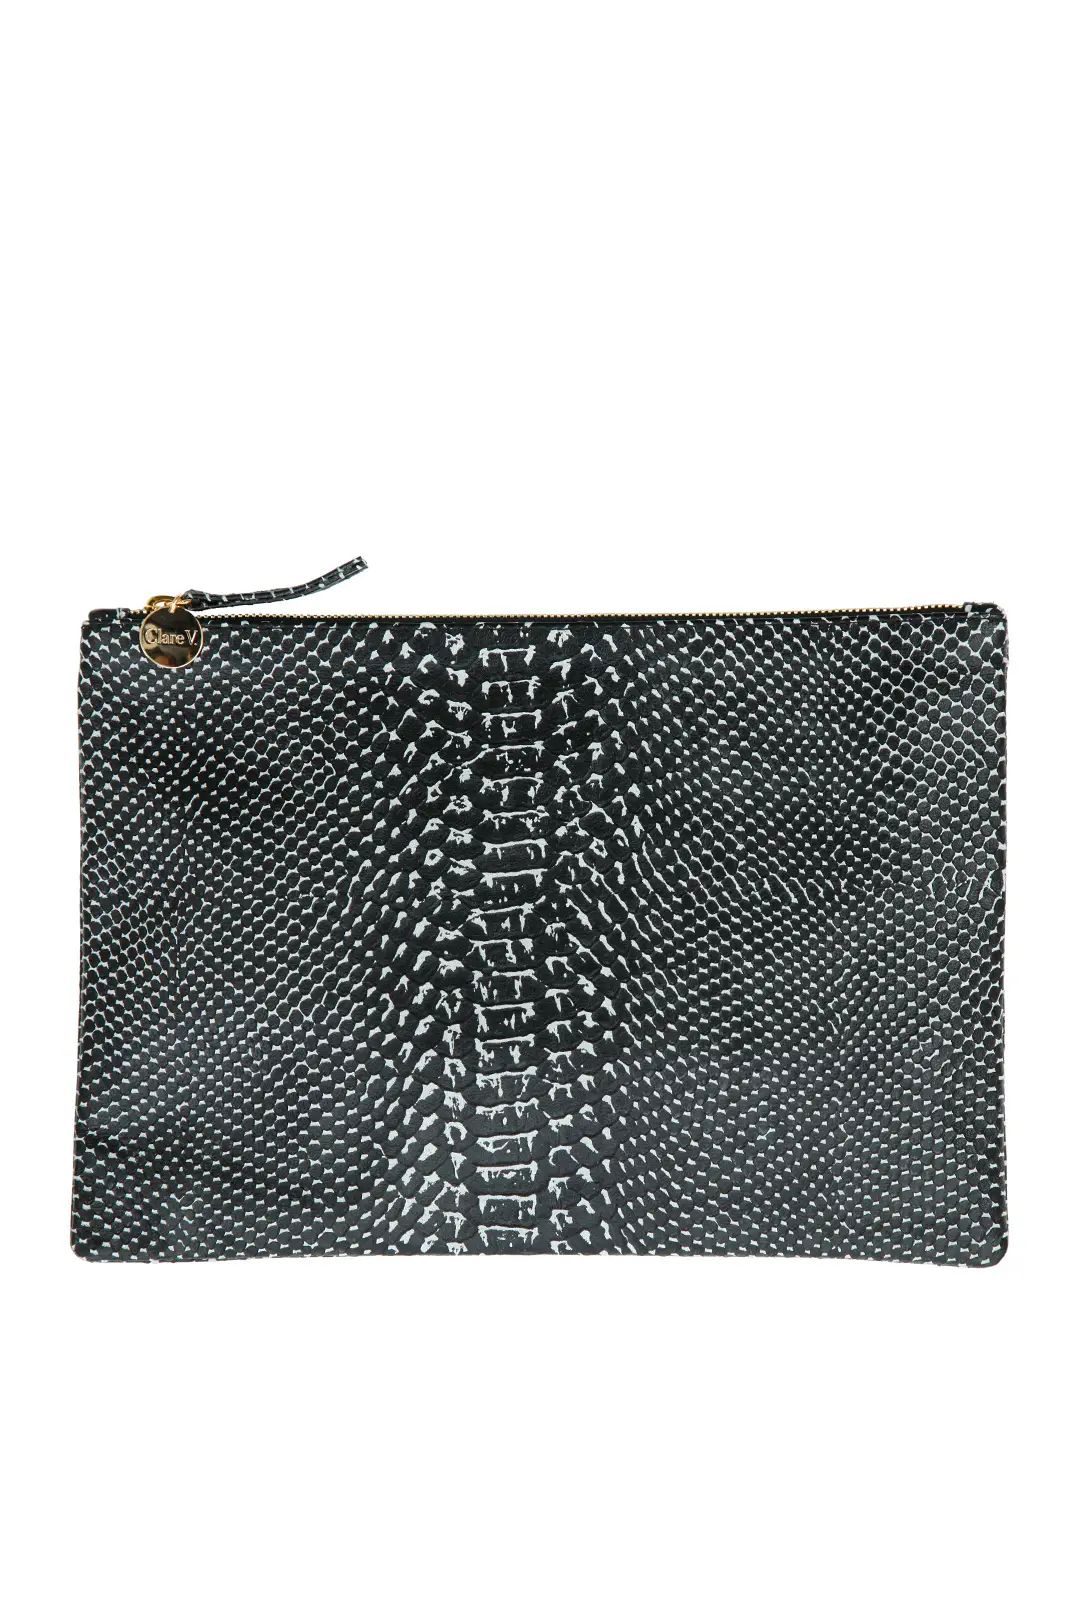 Clare V. Snake Flat Clutch | Rent The Runway